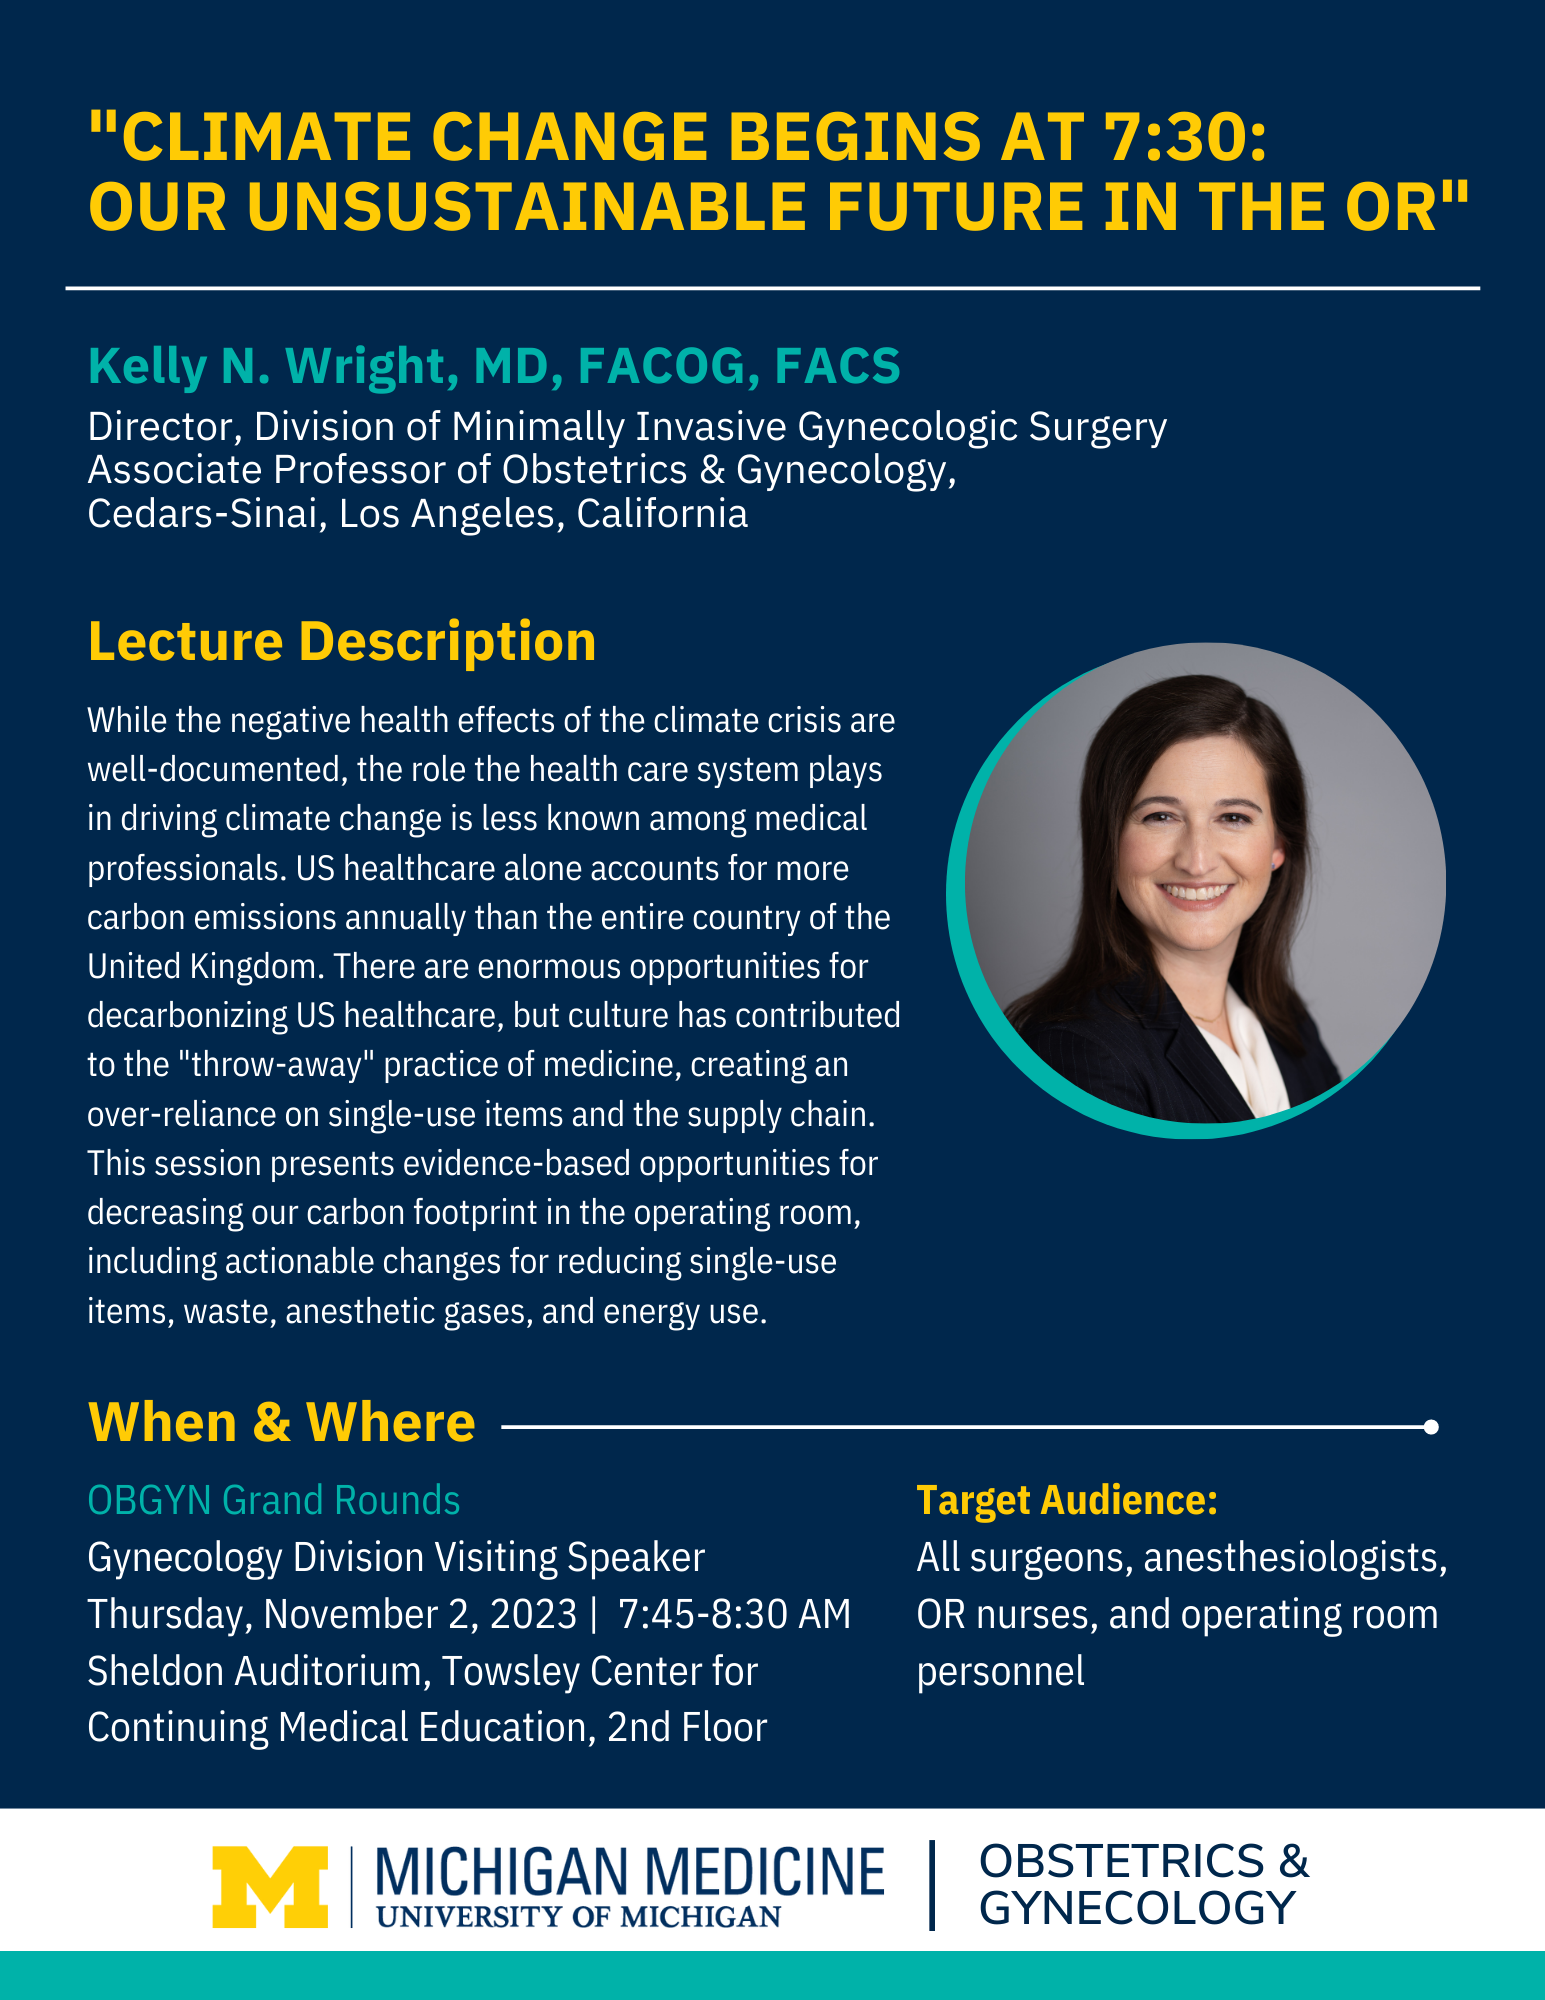 Flyer for OBGYN Grand Rounds on Nov 2, 2023 with Dr. Kelly Wright